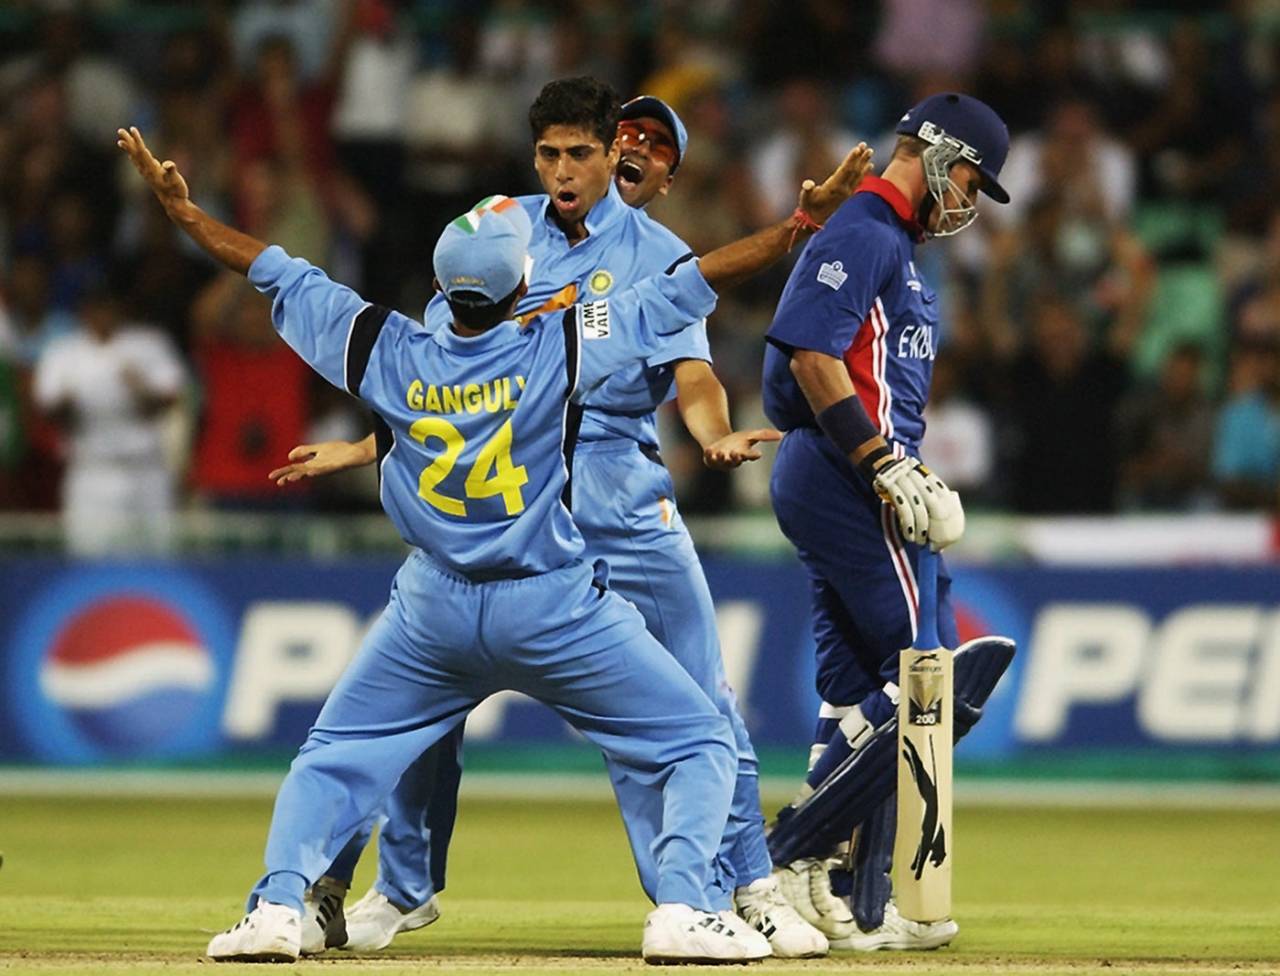 Ashish Nehra celebrates with Sourav Ganguly after taking the wicket of Alec Stewart, World Cup, England v India, Durban, February 26, 2003